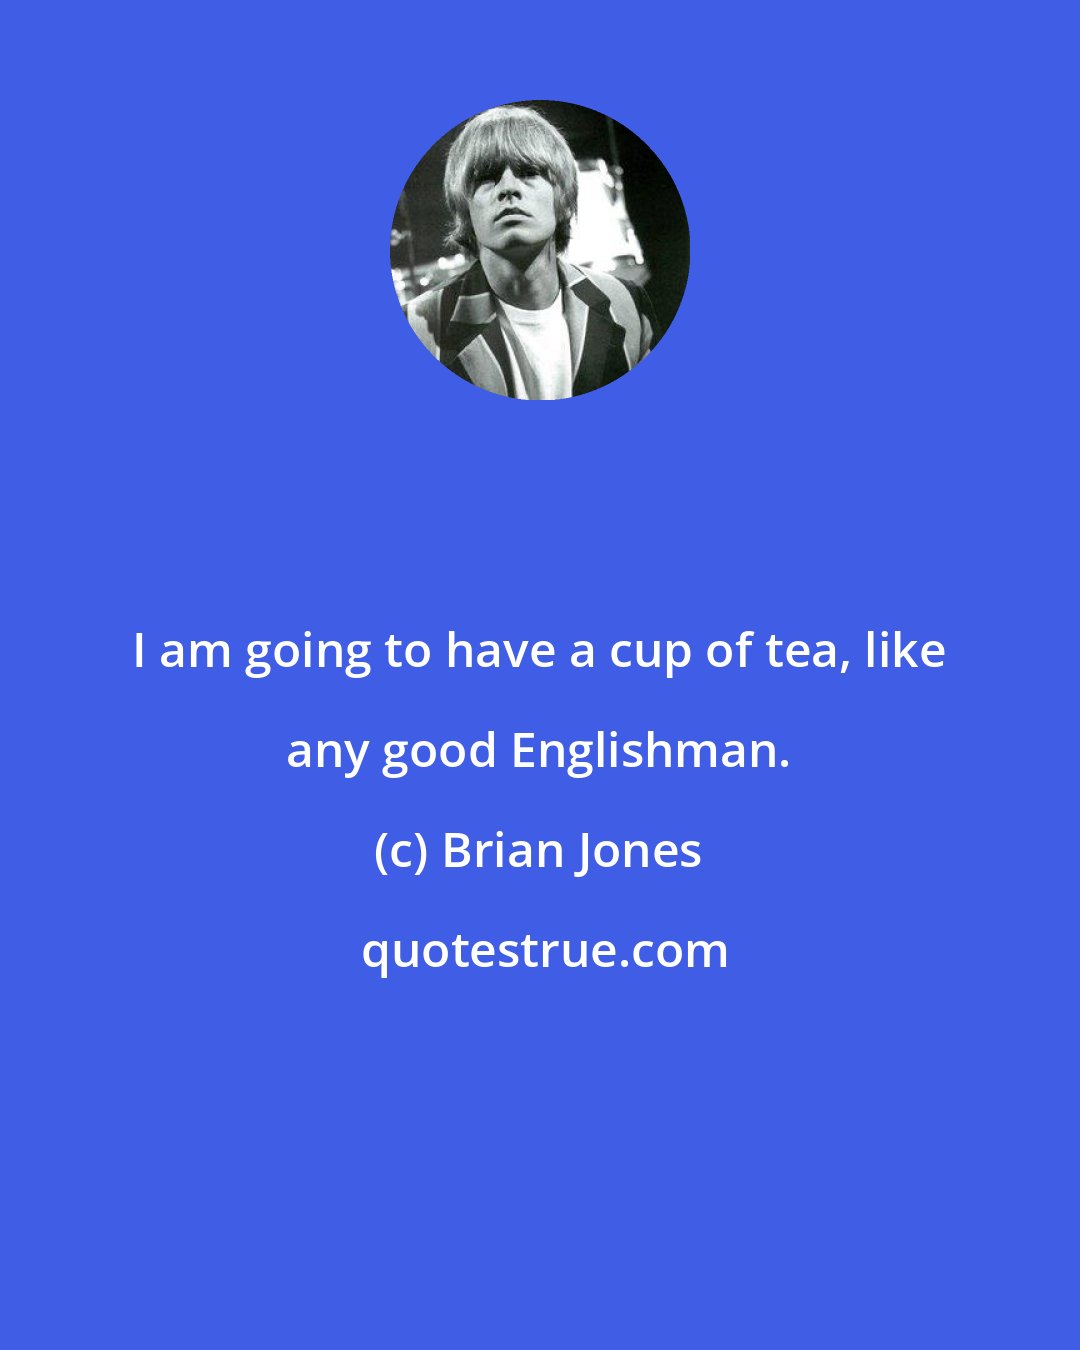 Brian Jones: I am going to have a cup of tea, like any good Englishman.